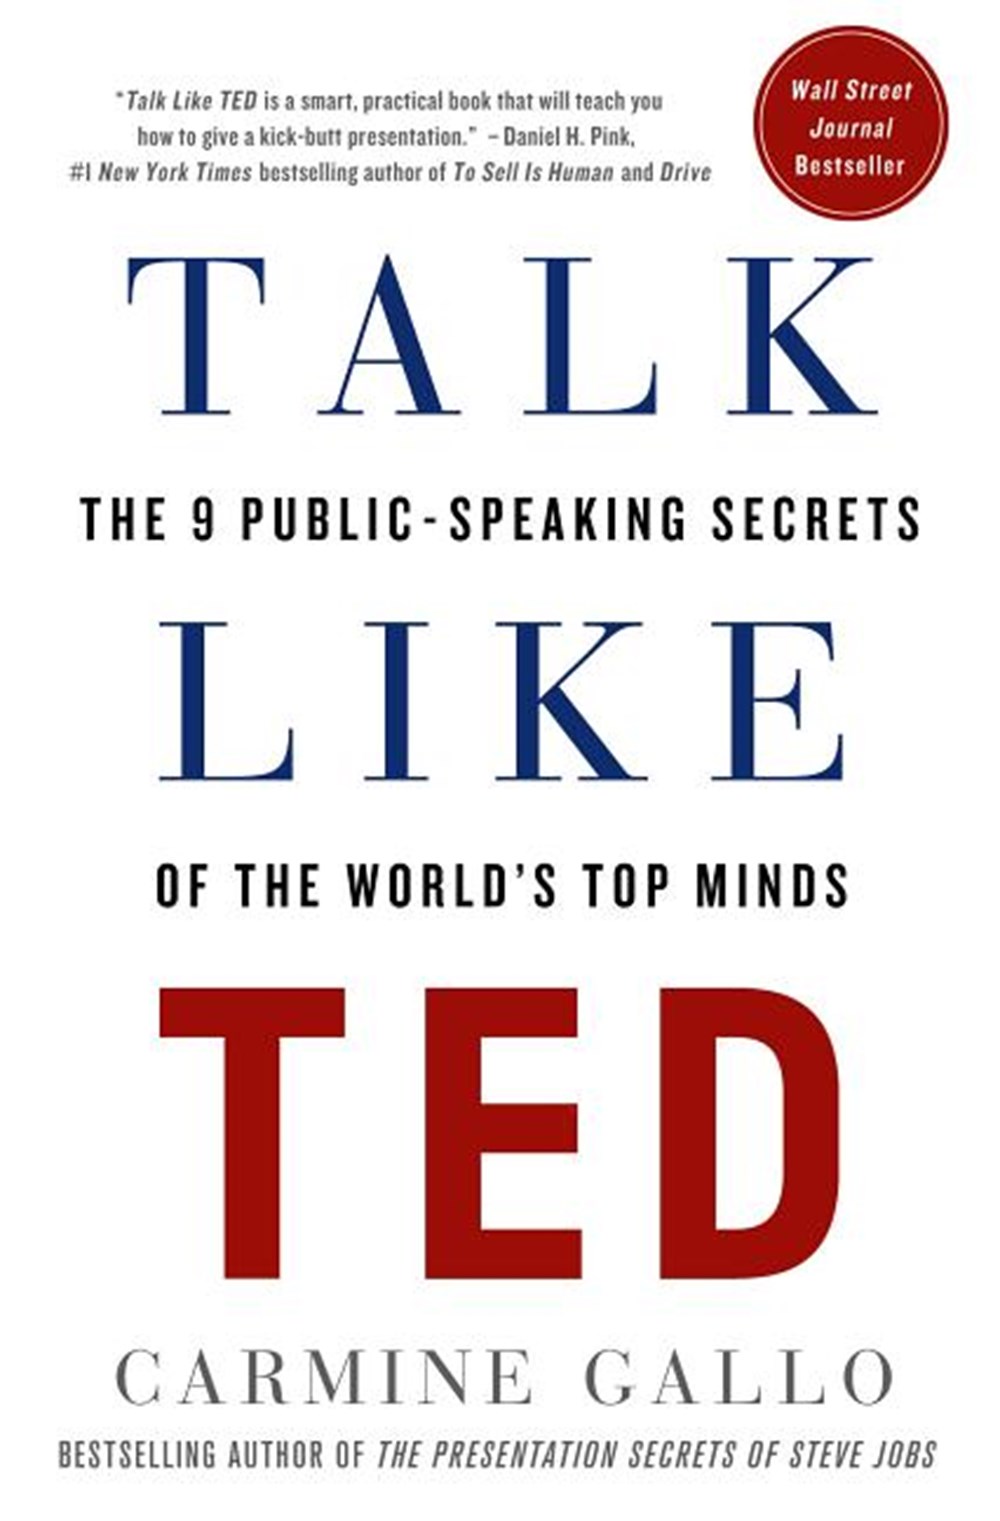 Talk Like Ted The 9 Public-Speaking Secrets of the World's Top Minds